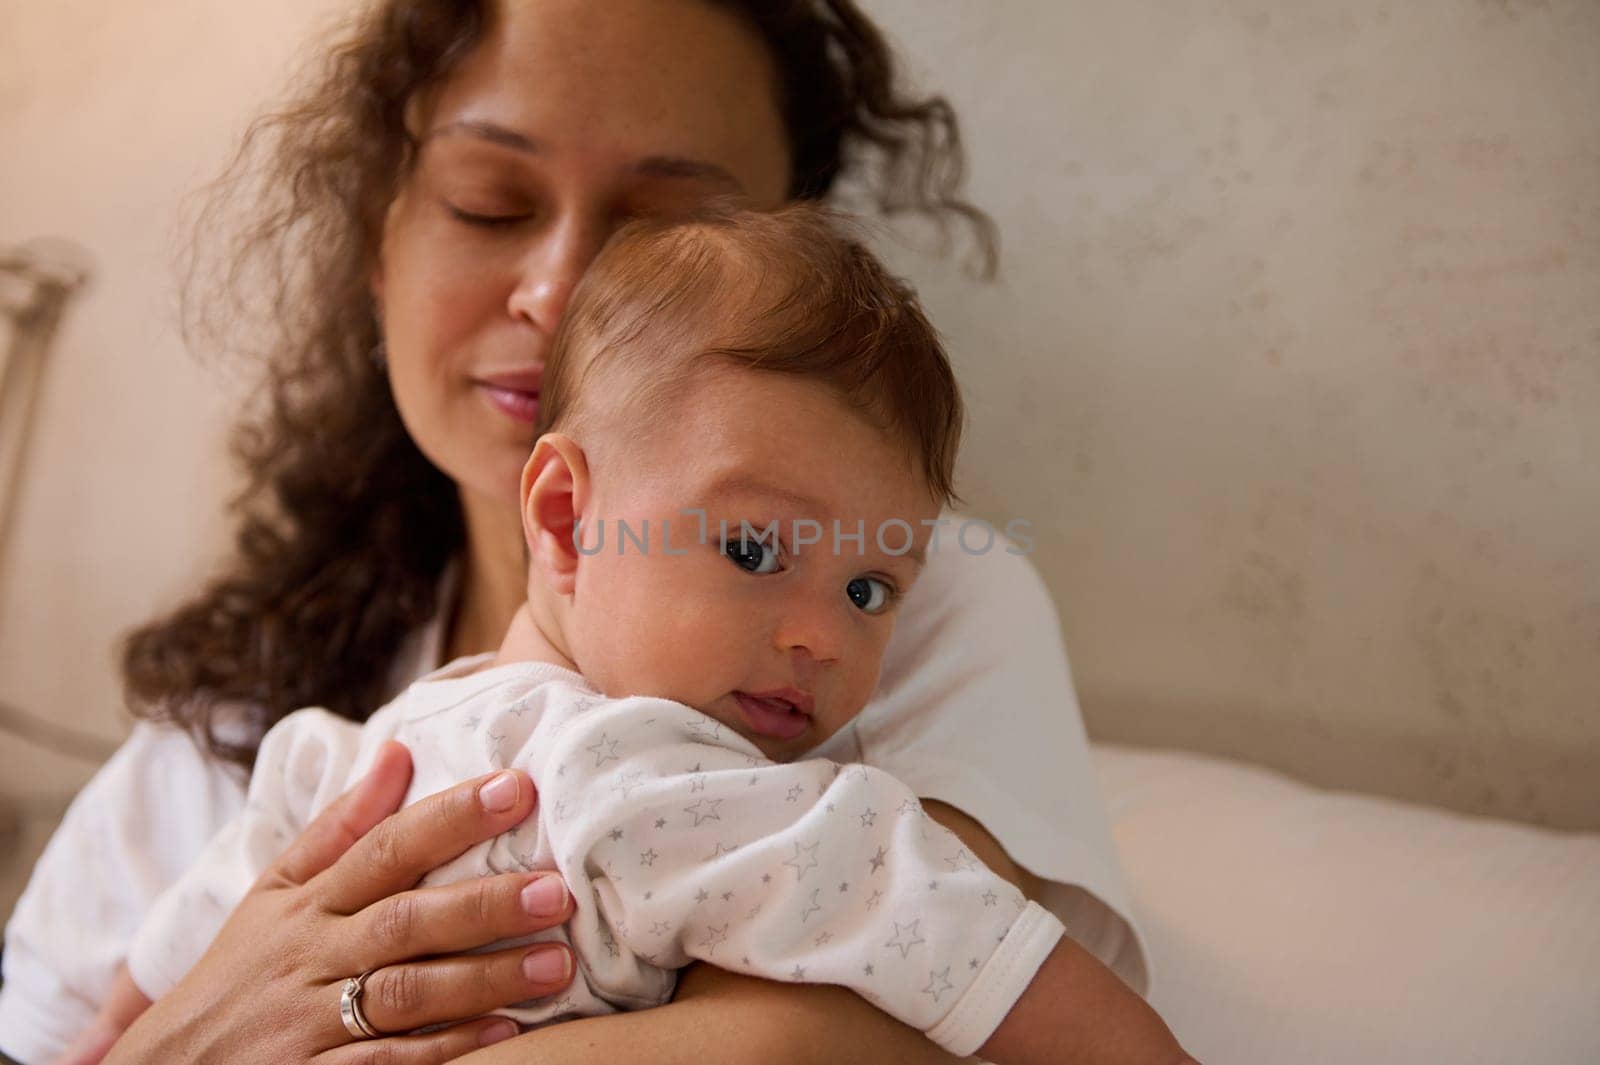 Selective focus adorable Caucasian child, newborn baby in the hands of delightful Latin American young adult blur woman, happy loving mother gently hugging her baby boy. Infancy and maternity concept